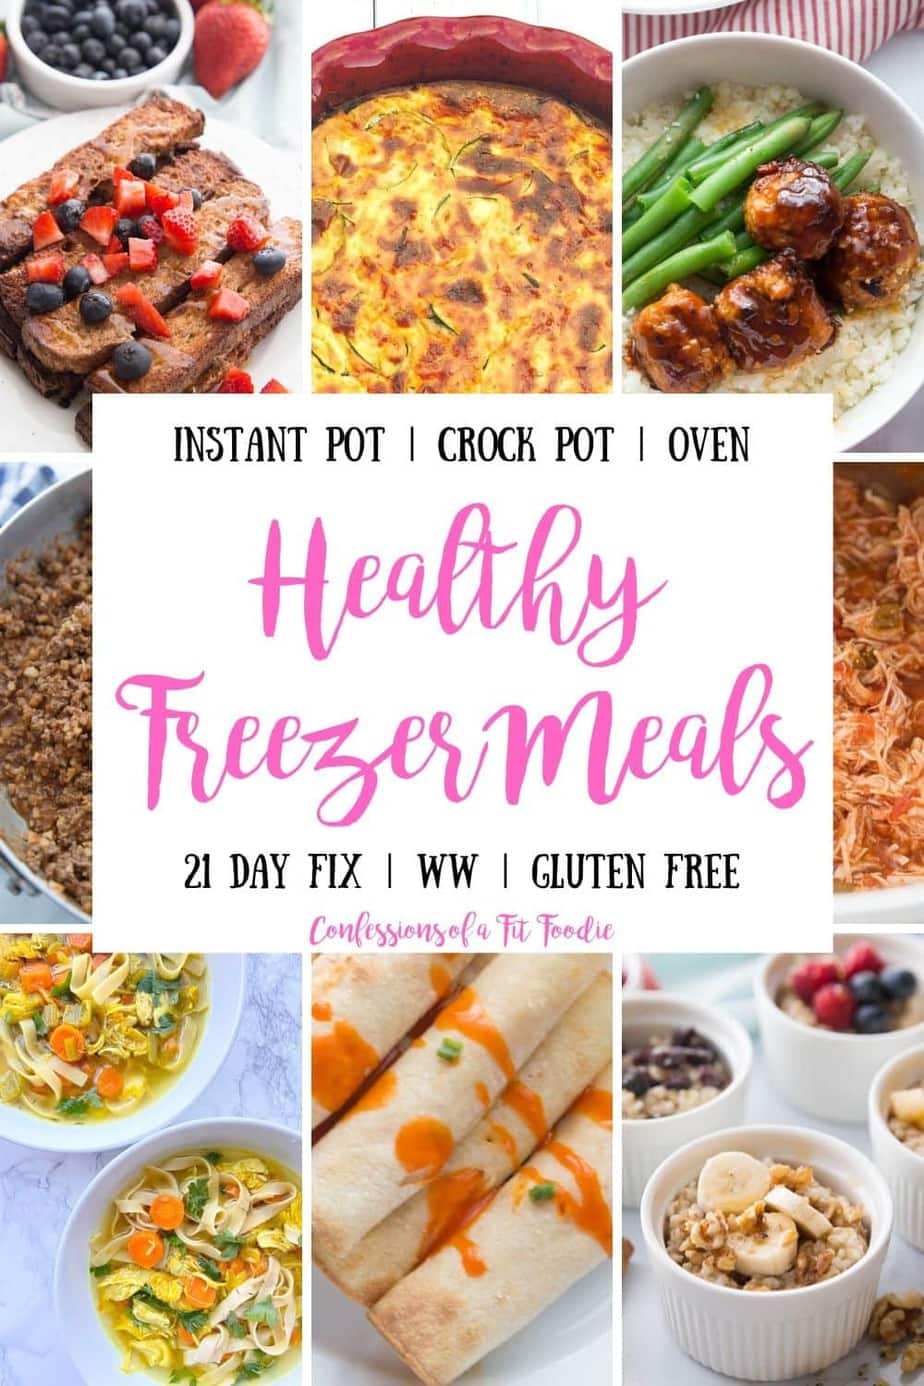 Low Carb Slow Cooker and Instant Pot Meals - My Table of Three My